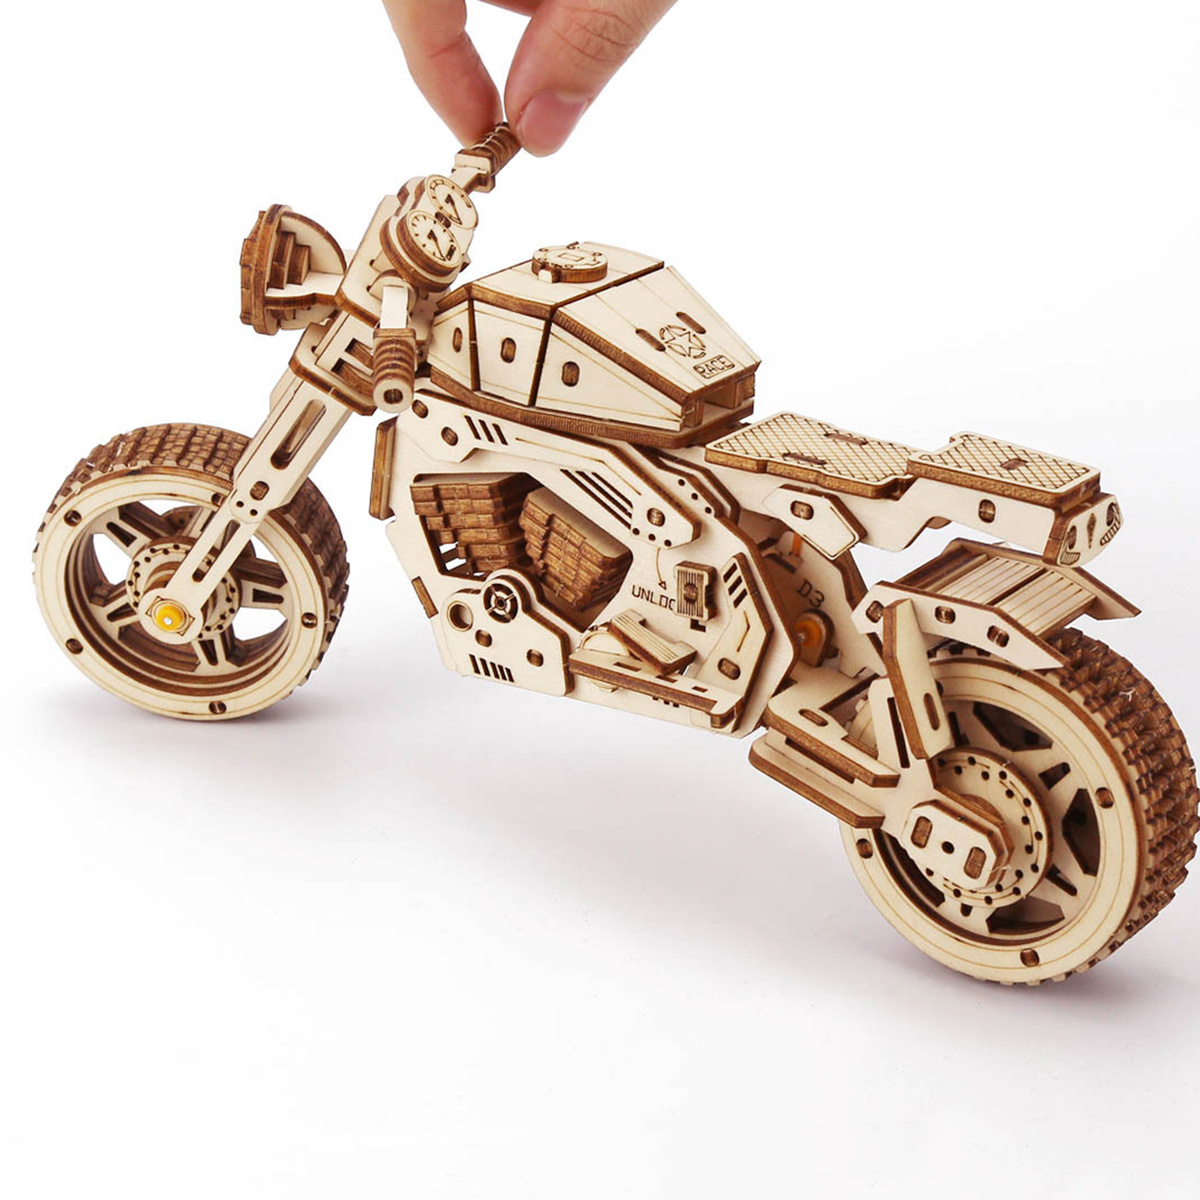 

3d Wooden Puzzle Motorcycle Model Kits To Build Wooden Construction Handmade Craft Unique Gift Christmas